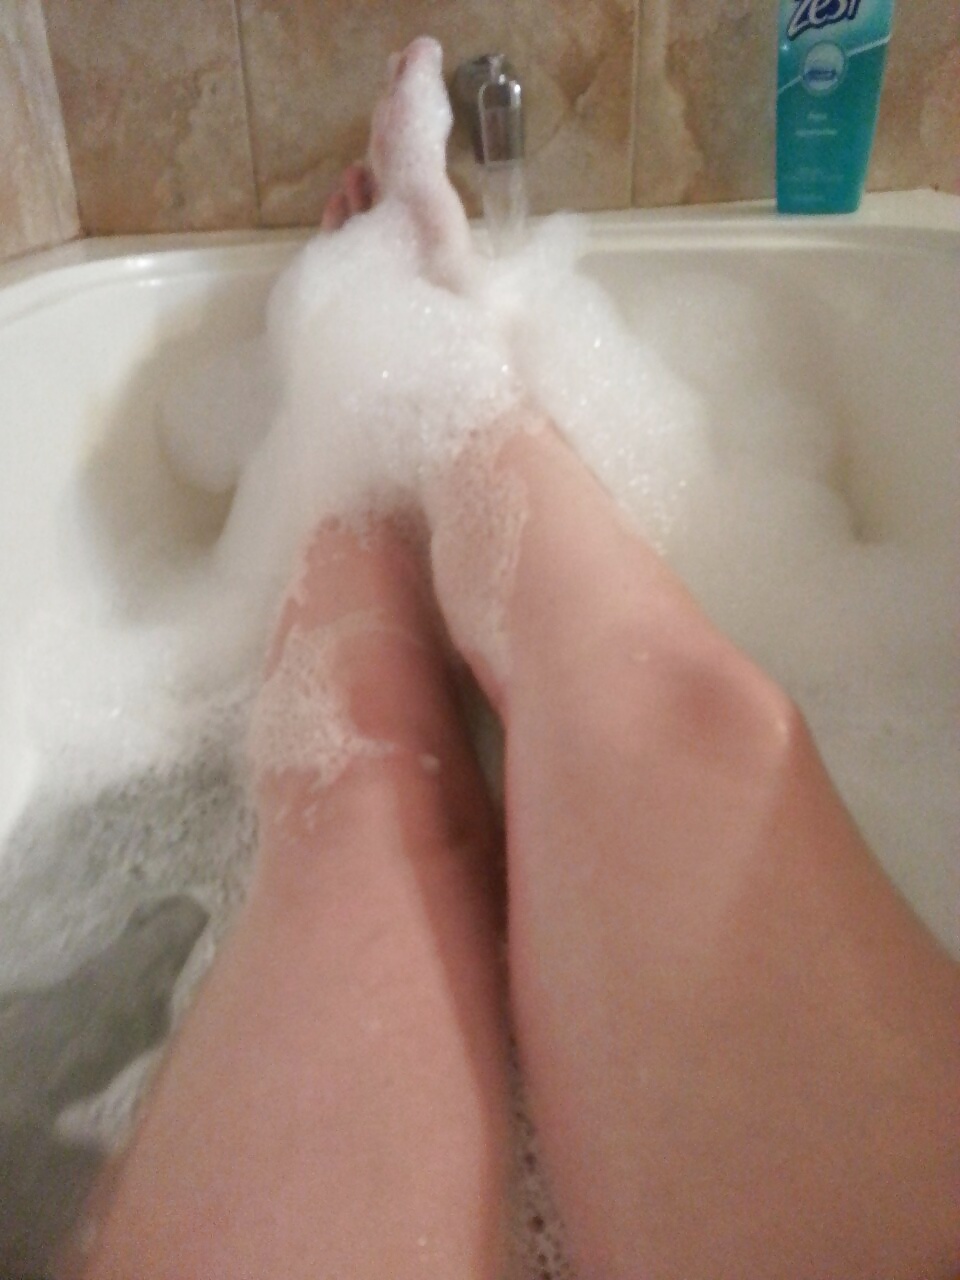 Bath time after a long day of sexasize #27954369